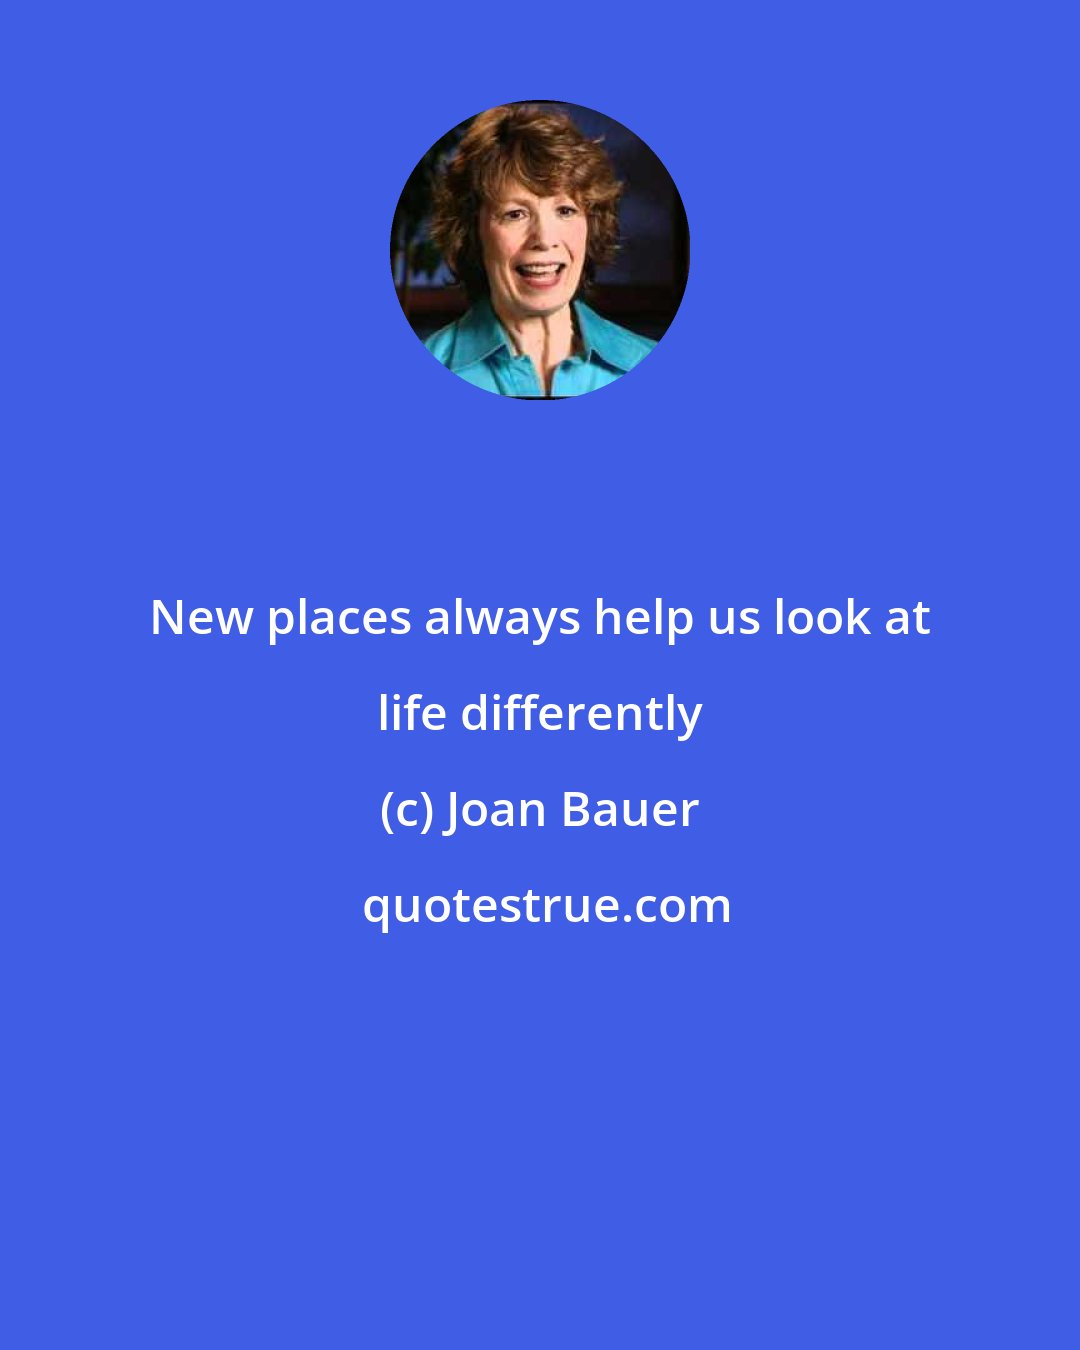 Joan Bauer: New places always help us look at life differently